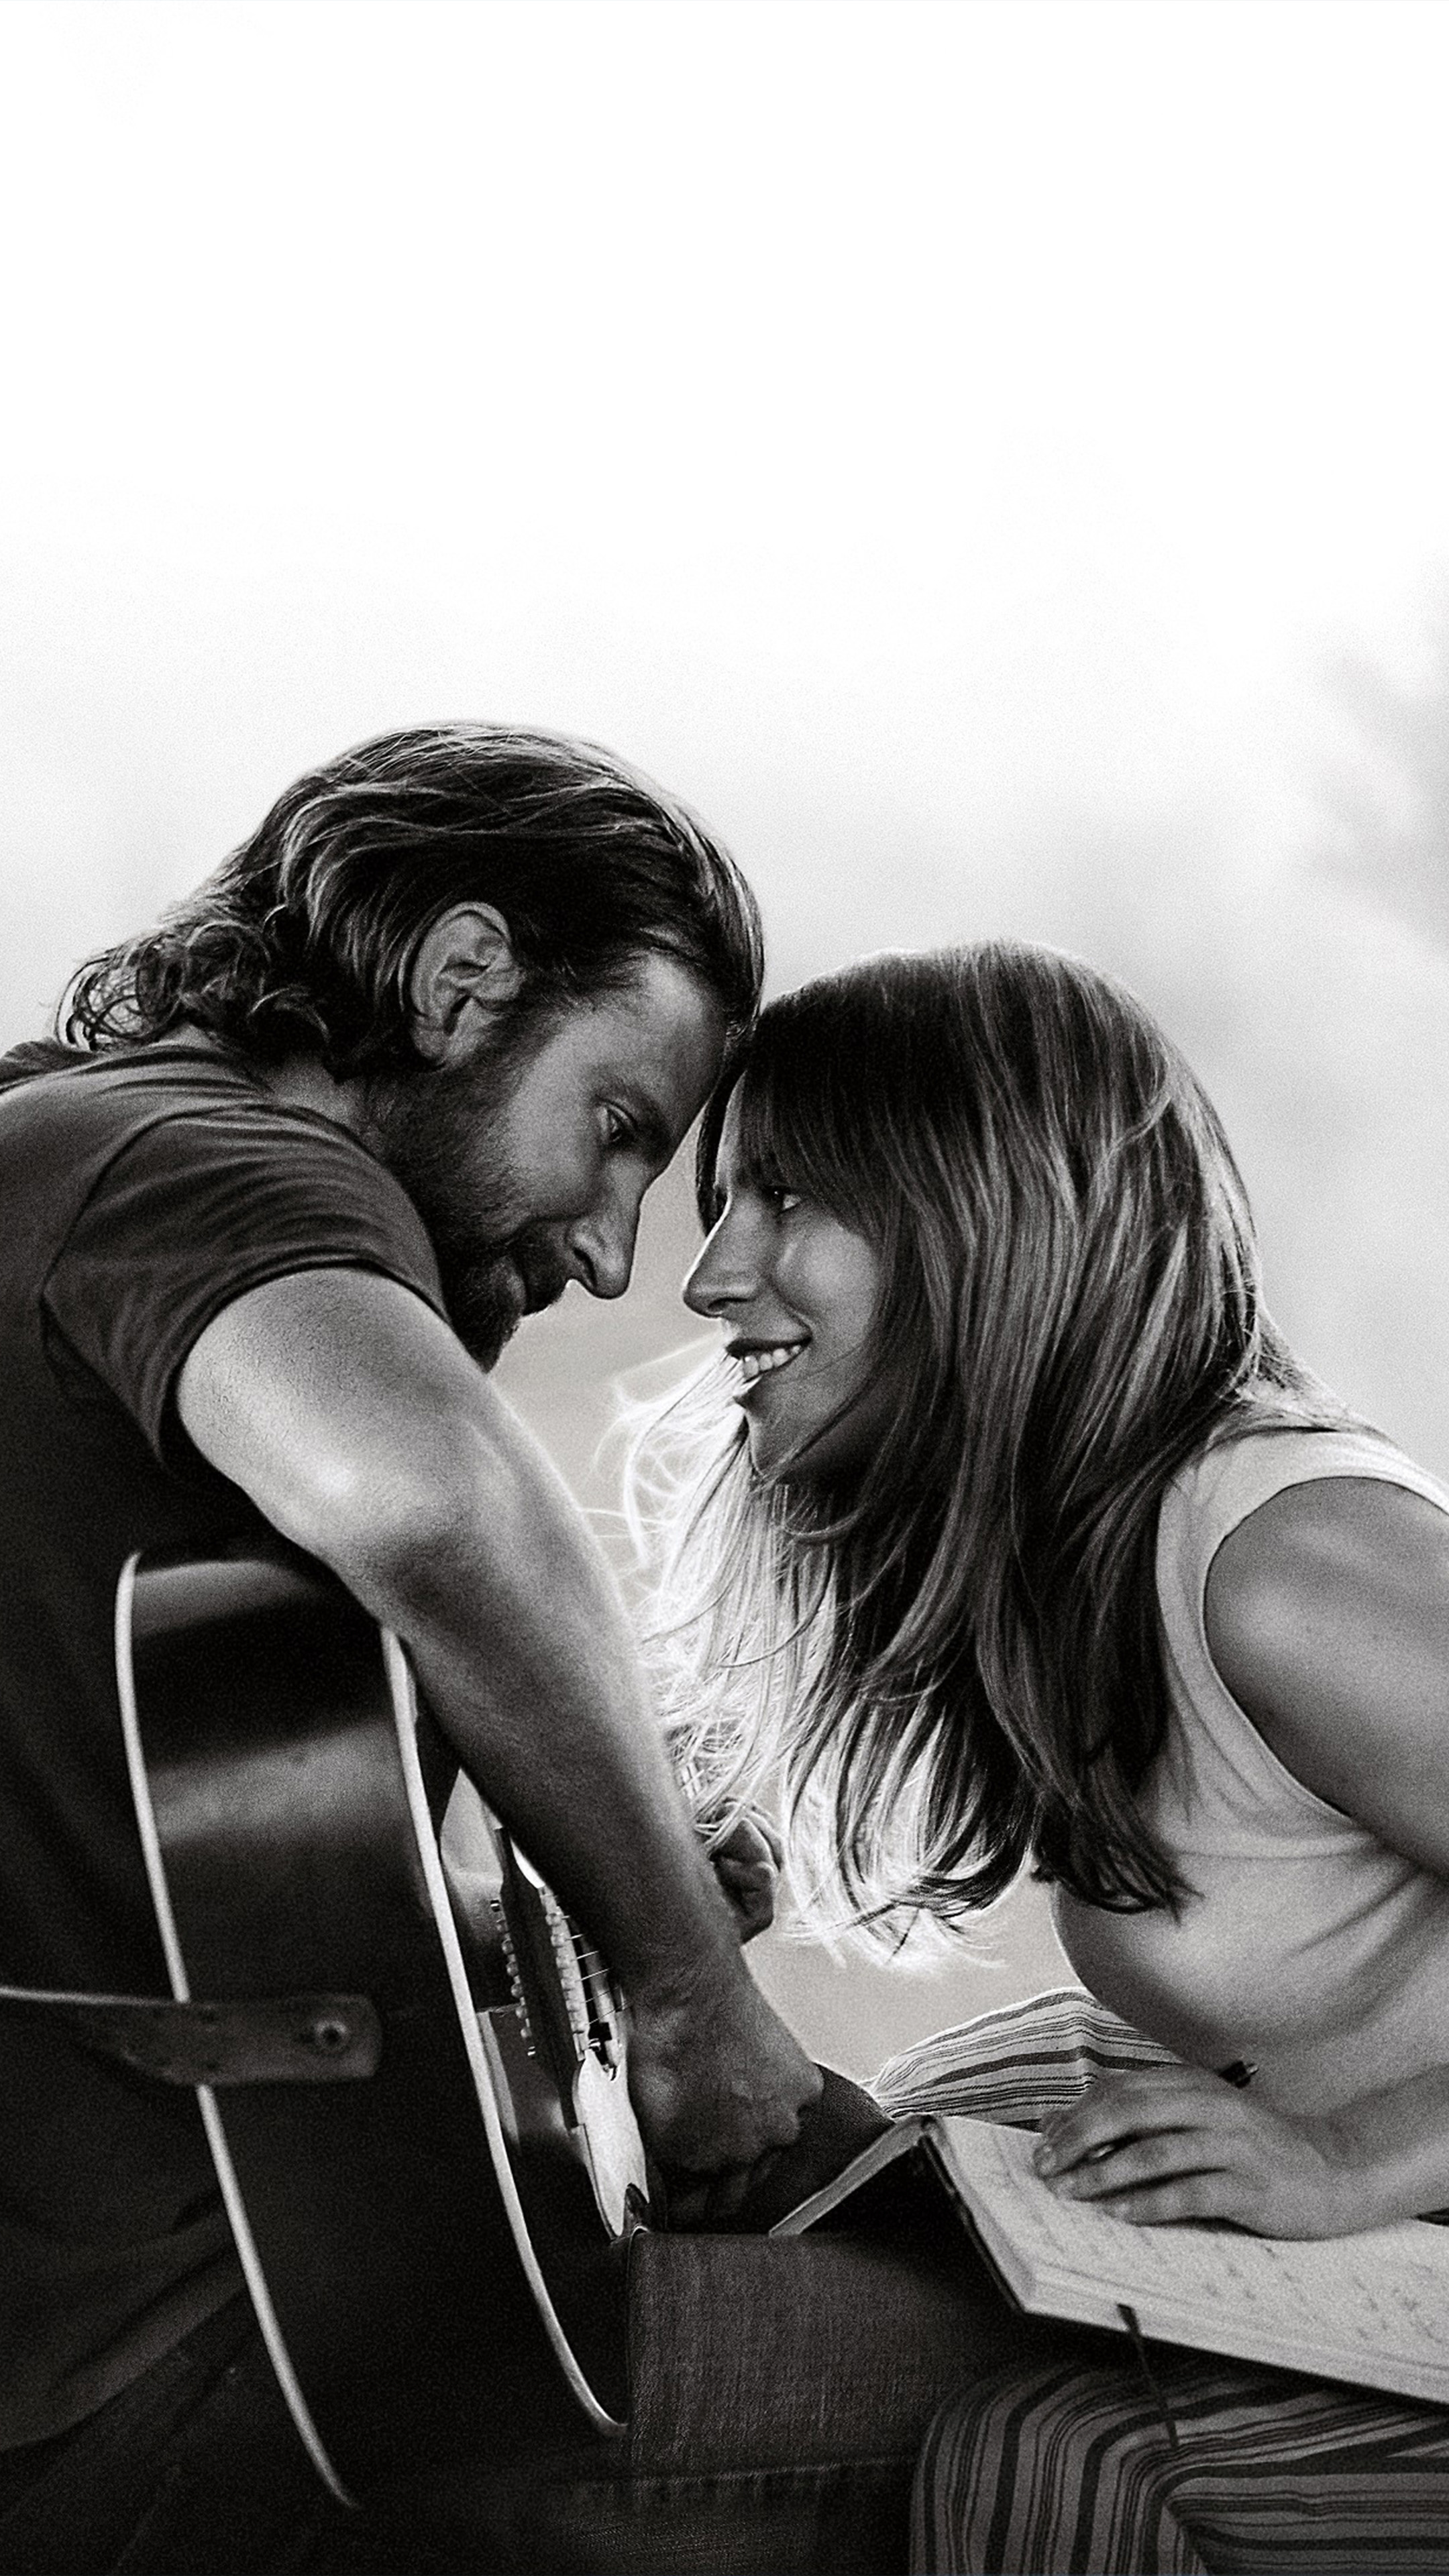 Lady Gaga: Performed the soundtrack for A Star Is Born Pure, 2018 musical film, Bradley Cooper. 2160x3840 4K Wallpaper.